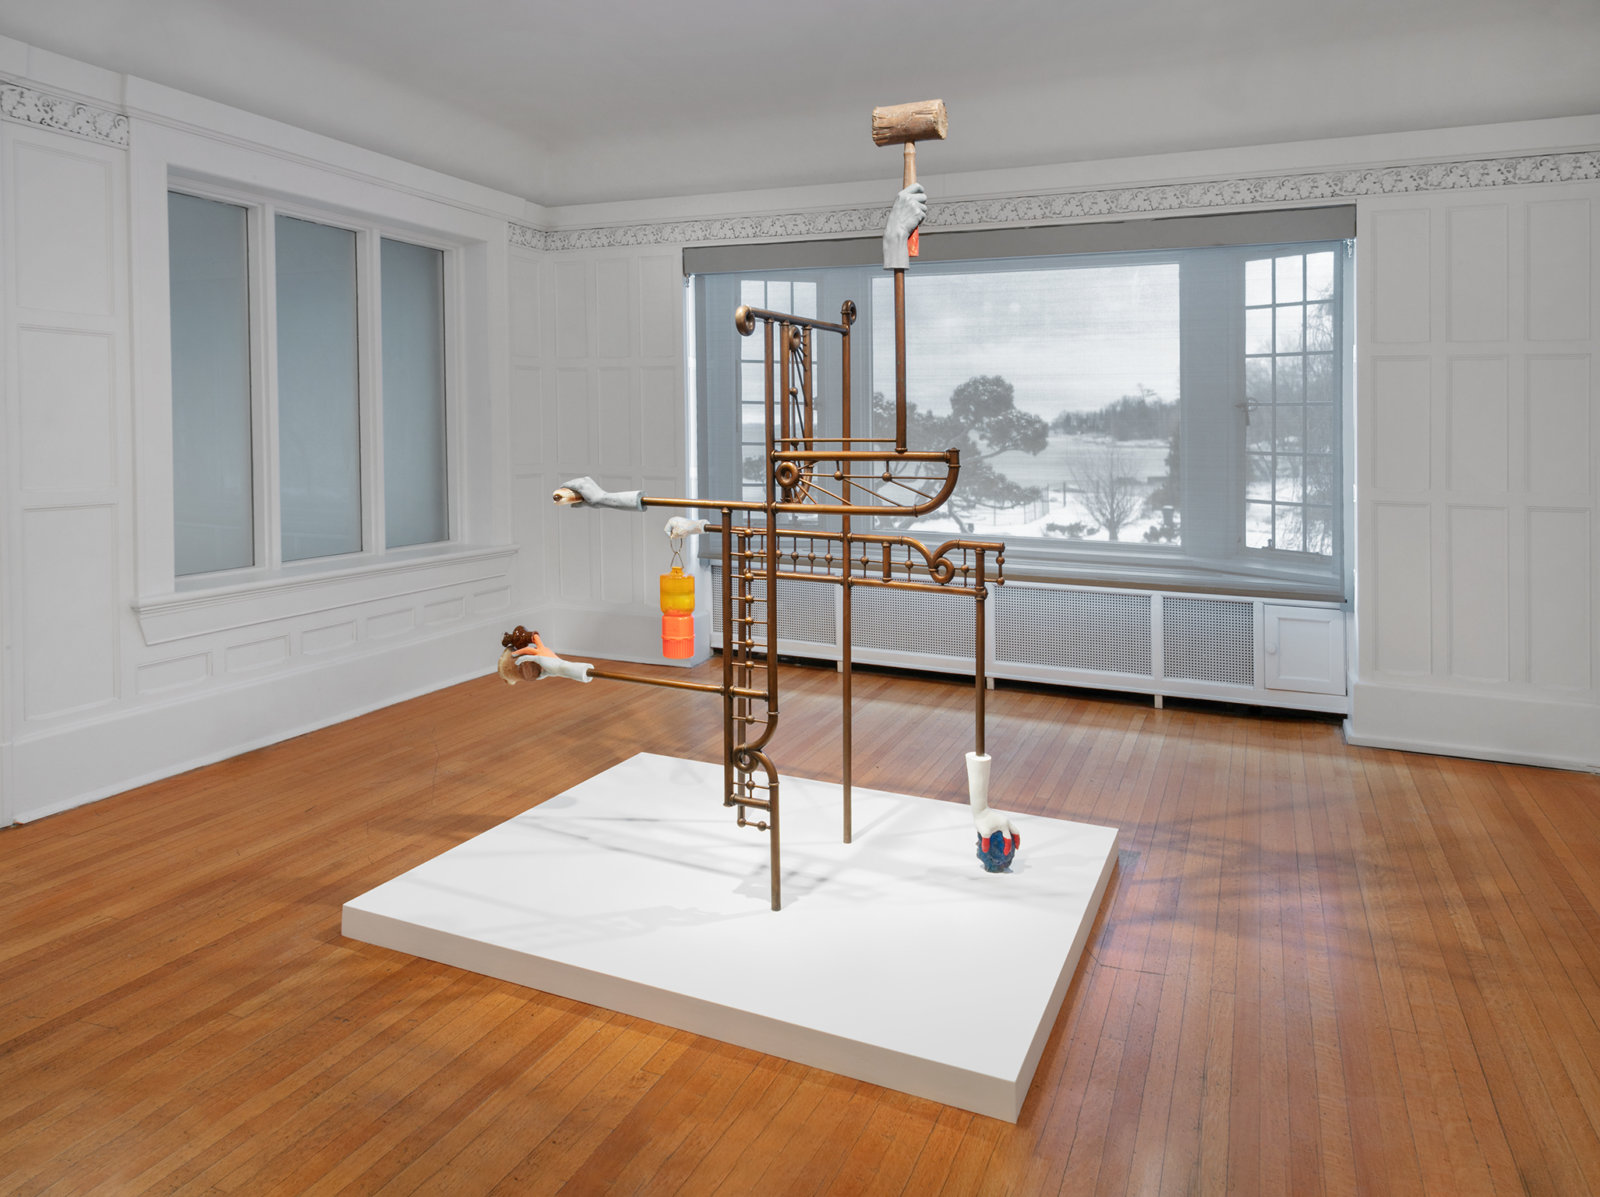 Valérie Blass, Meuble mécanique, 2012, bronze, found objects, ductal, fgr, epoxy, 80 x 54 x 27 in. (203 x 137 x 69 cm). Installation view, The Mime, the Model and the Dupe, Oakville Galleries, Oakville, 2019